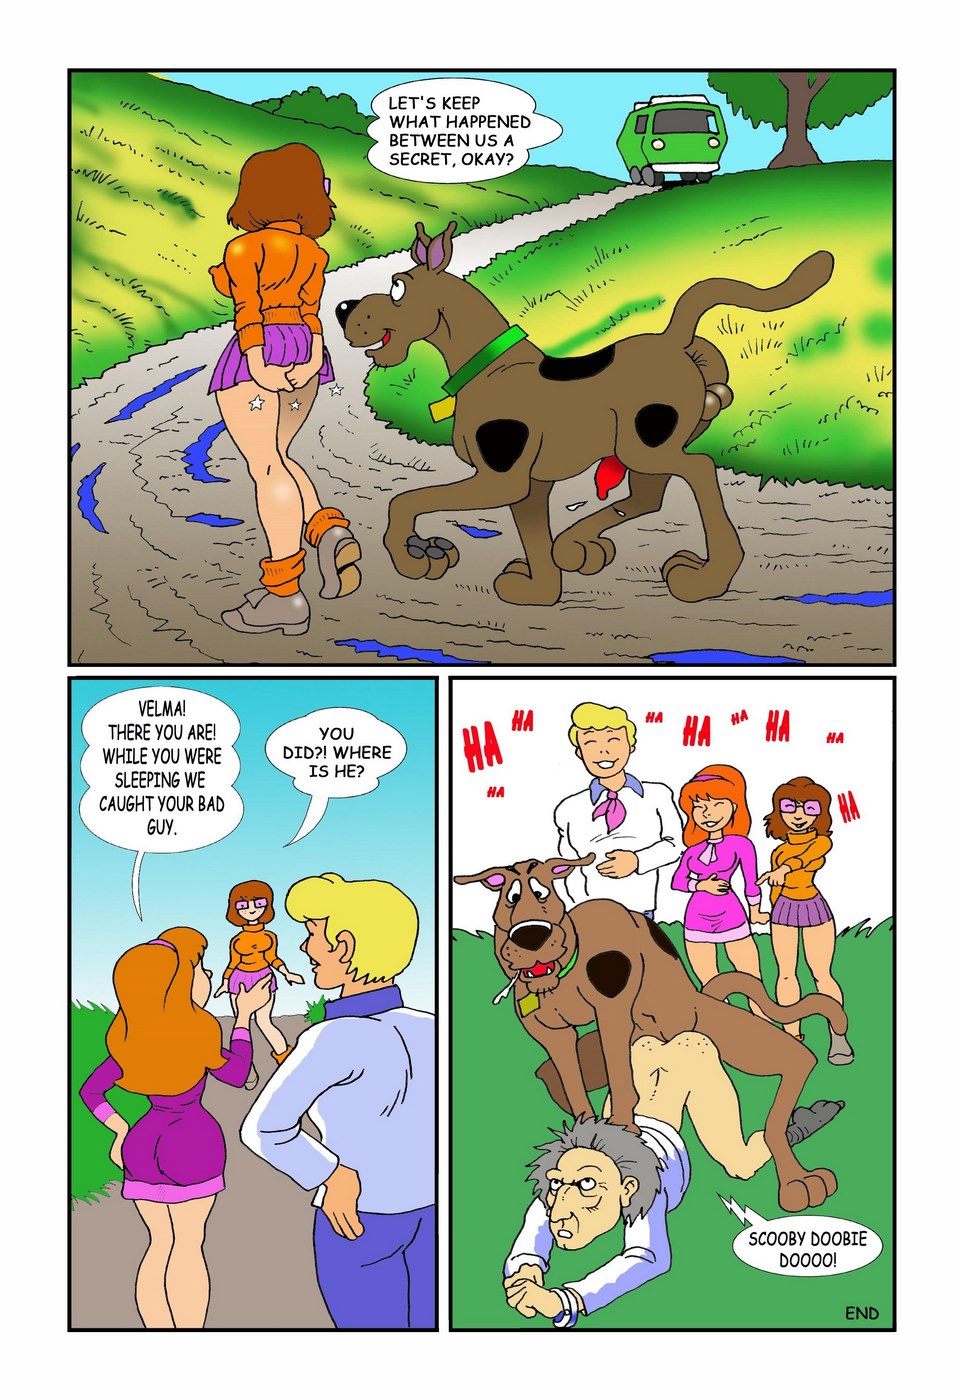 Mystery of the Sexual Weapon (Scooby-Doo)